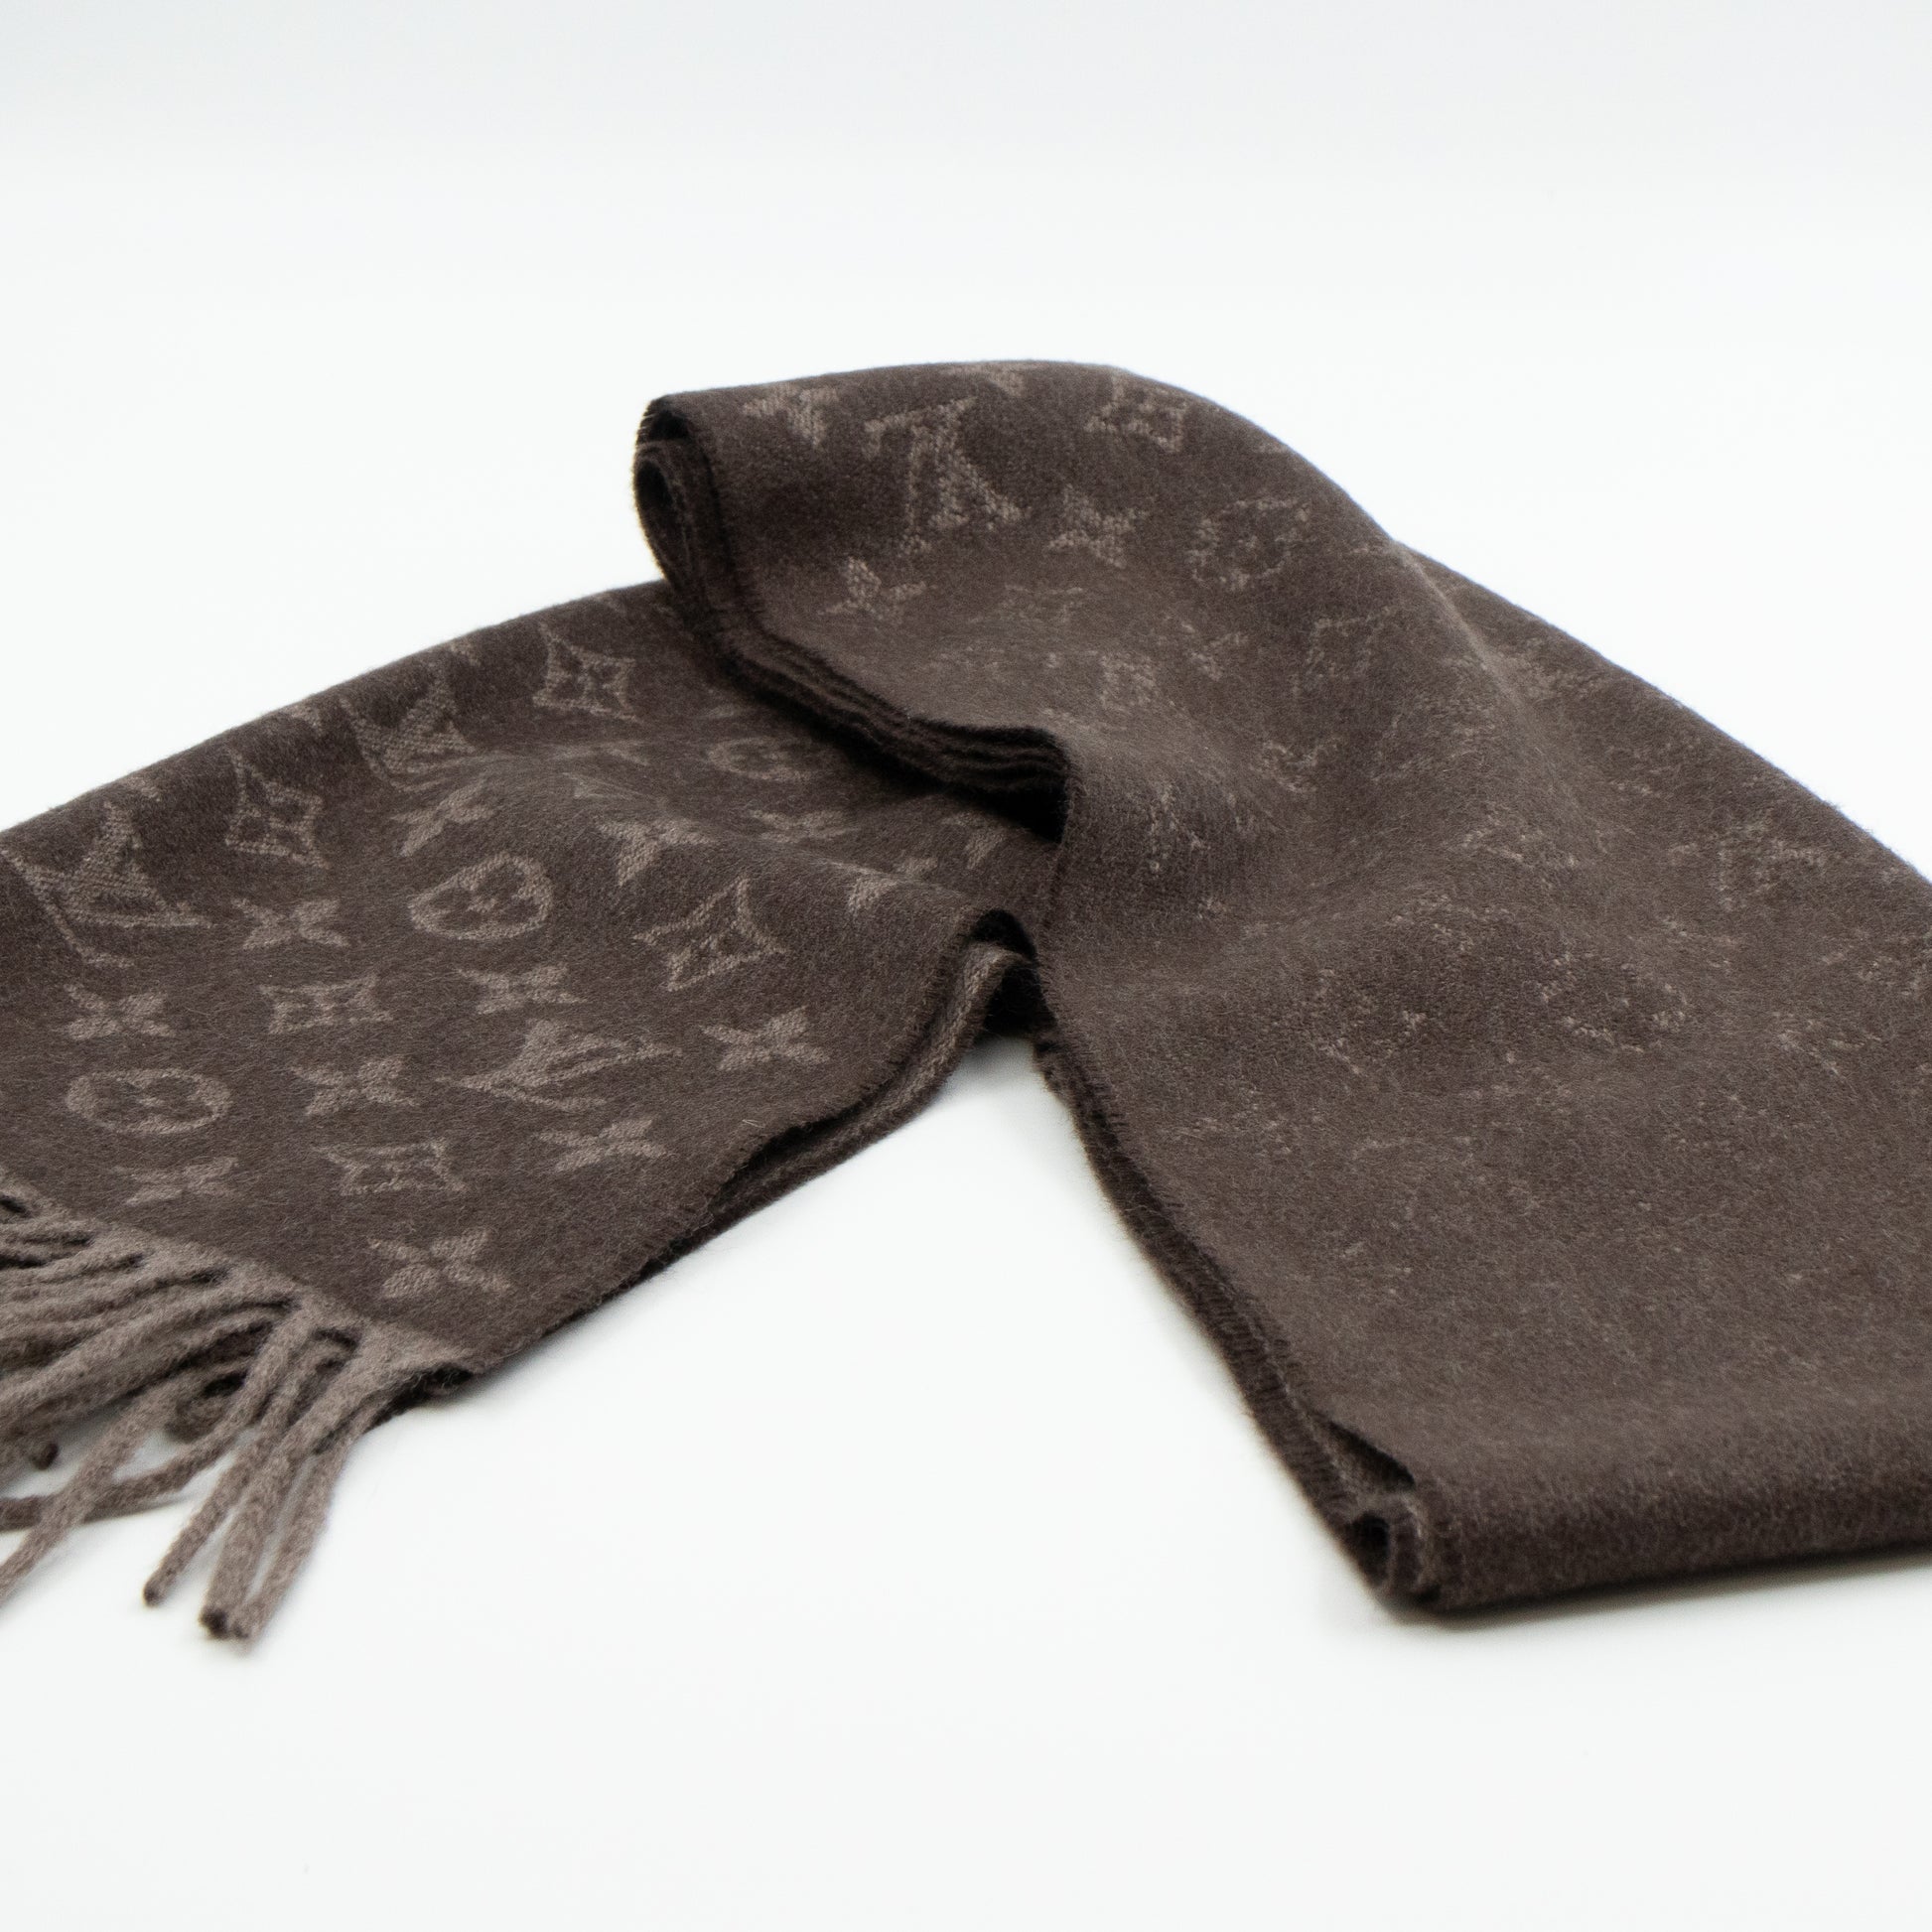 How to spot a fake Louis Vuitton scarf? Most of the scarves on